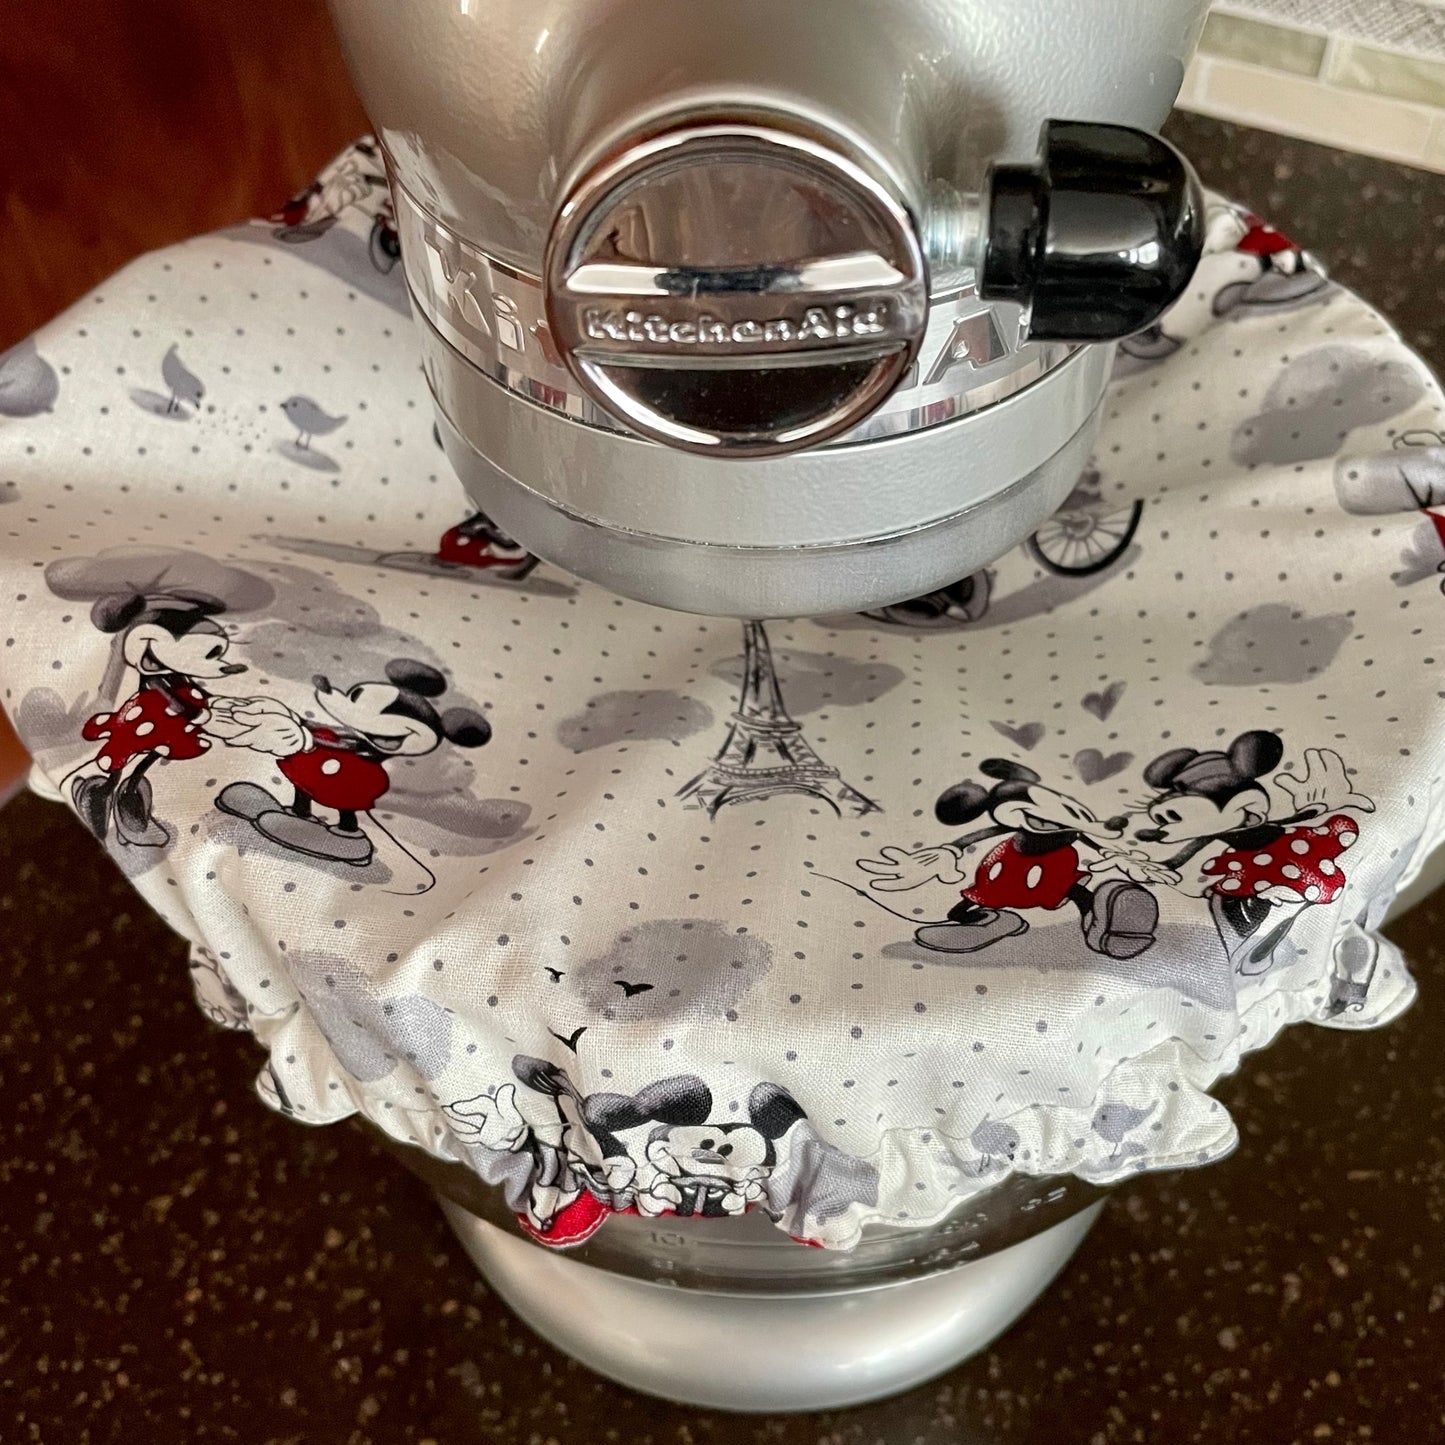 Stand Mixer Bowl Covers - Retro Mickey and Minnie Mouse Paris Theme